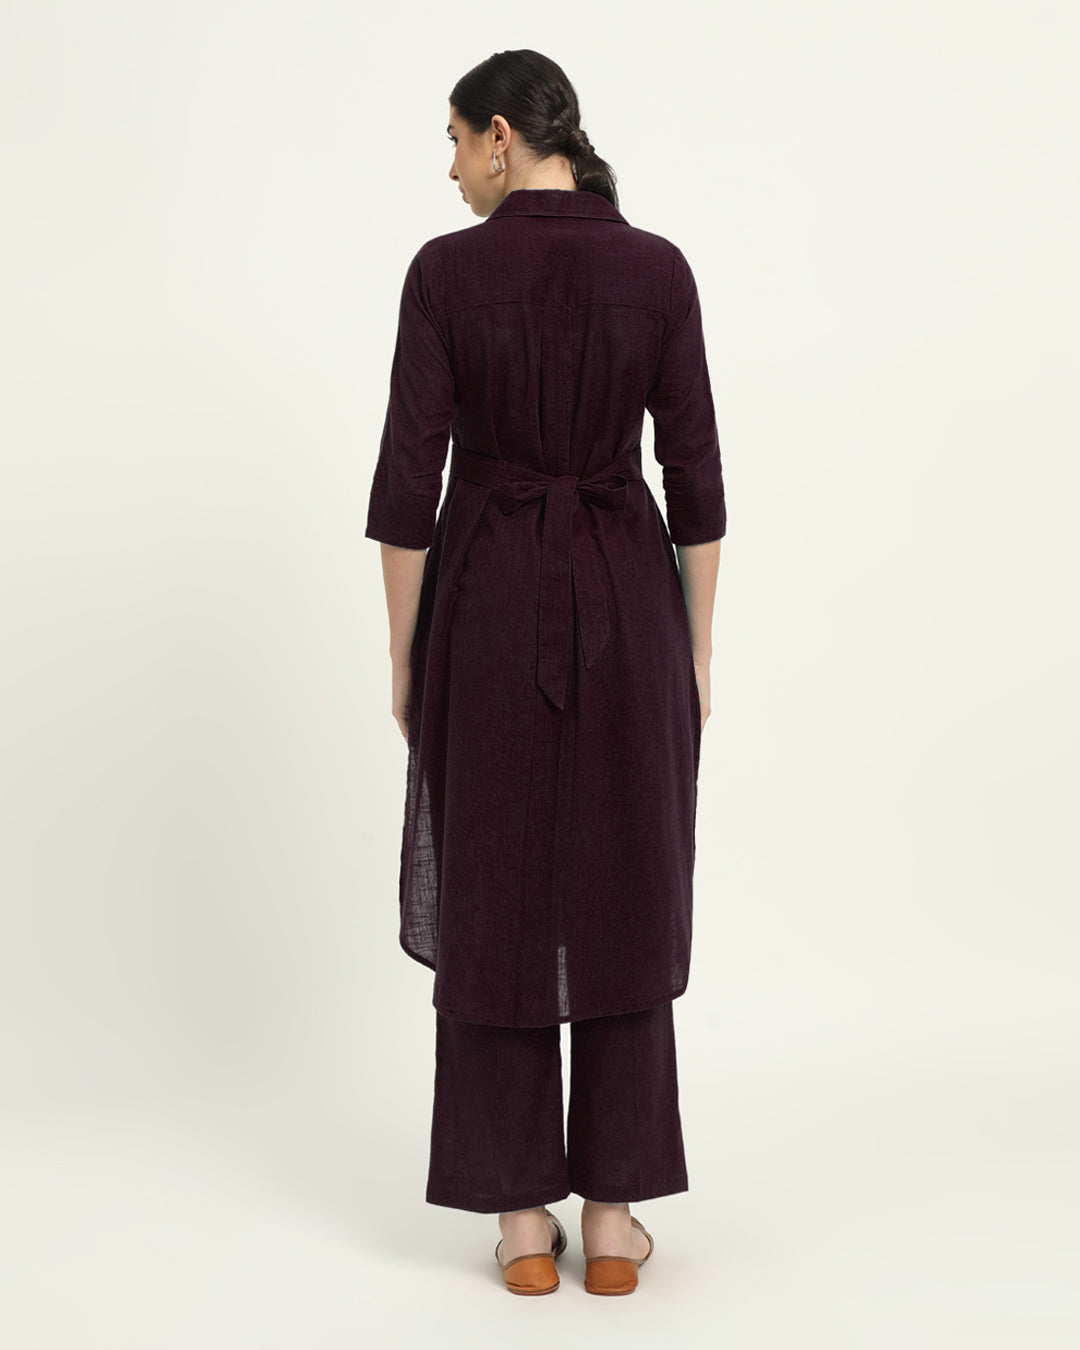 Plum Passion Bellisimo Belted Solid  Kurta (Without Bottoms)